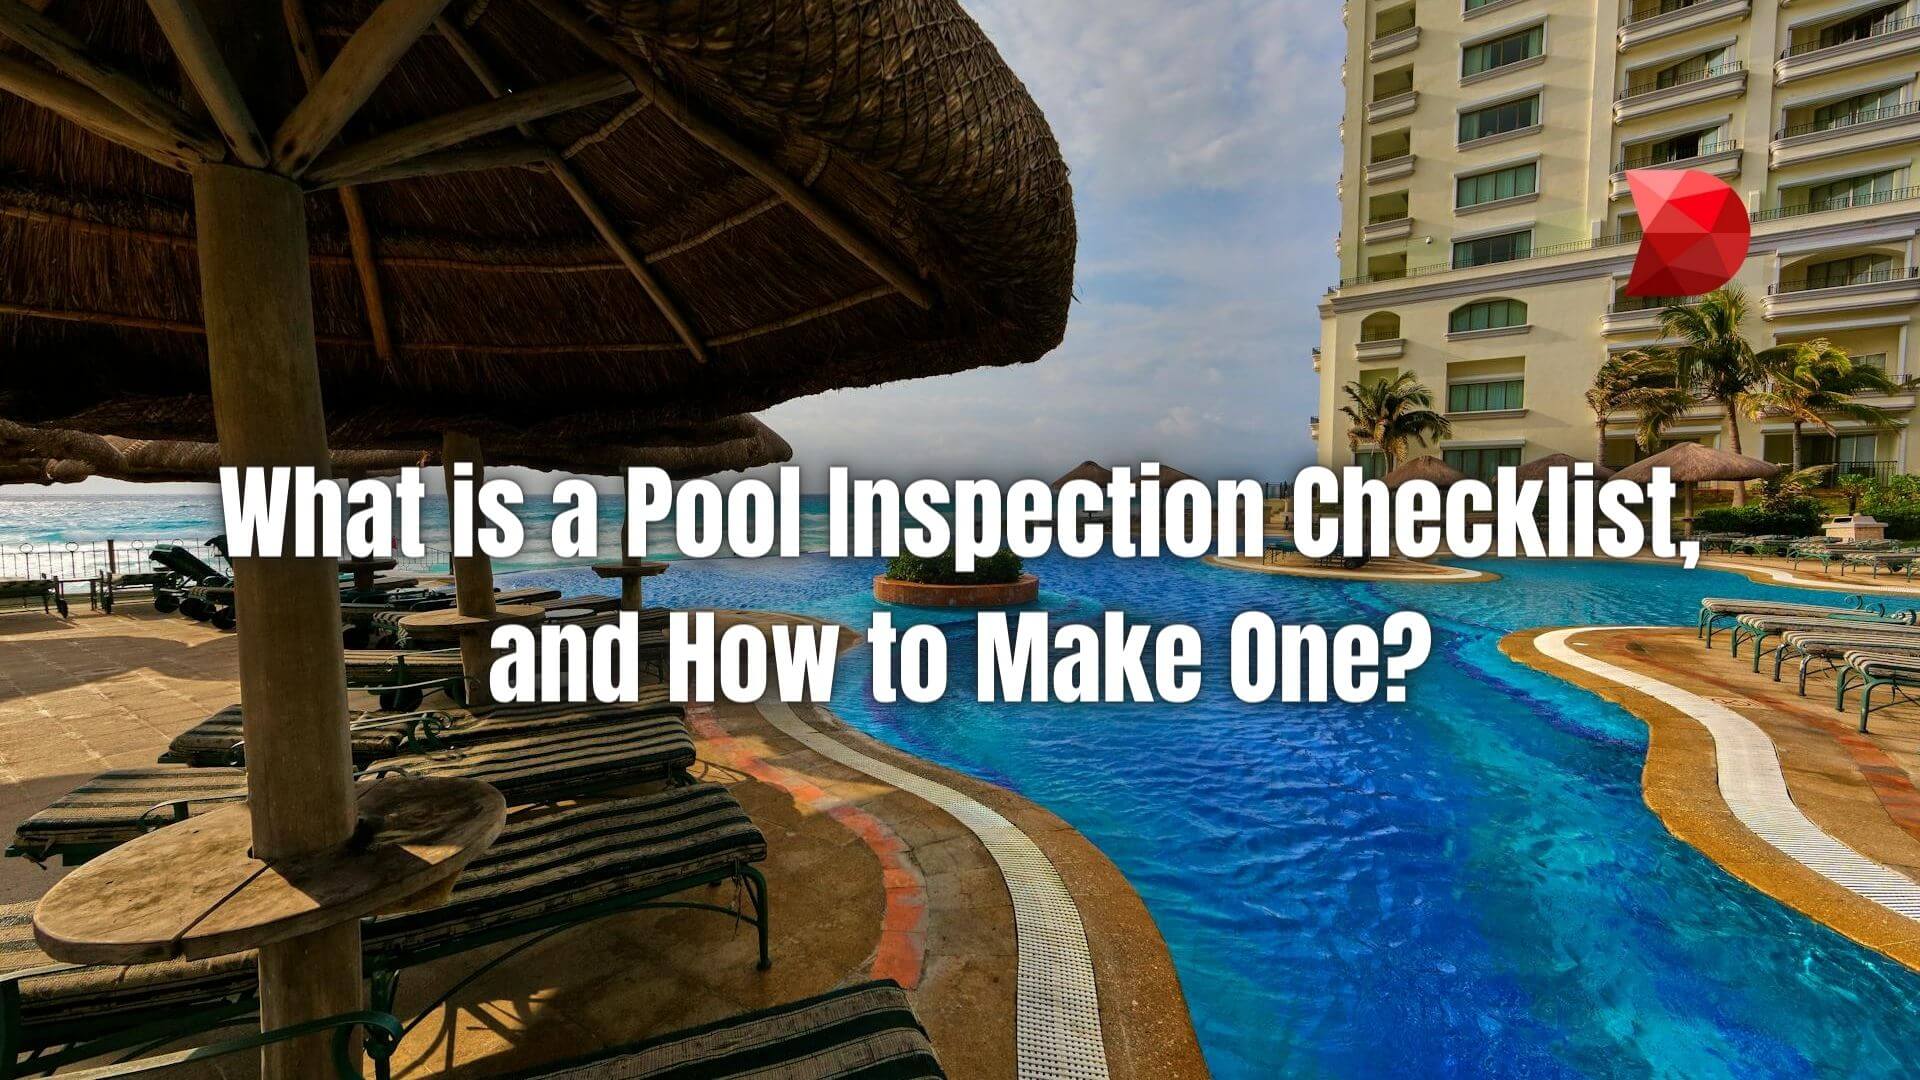 Craft a pool inspection checklist with our expert guide. Learn what to look for and how to prioritize safety in your pool assessment process.